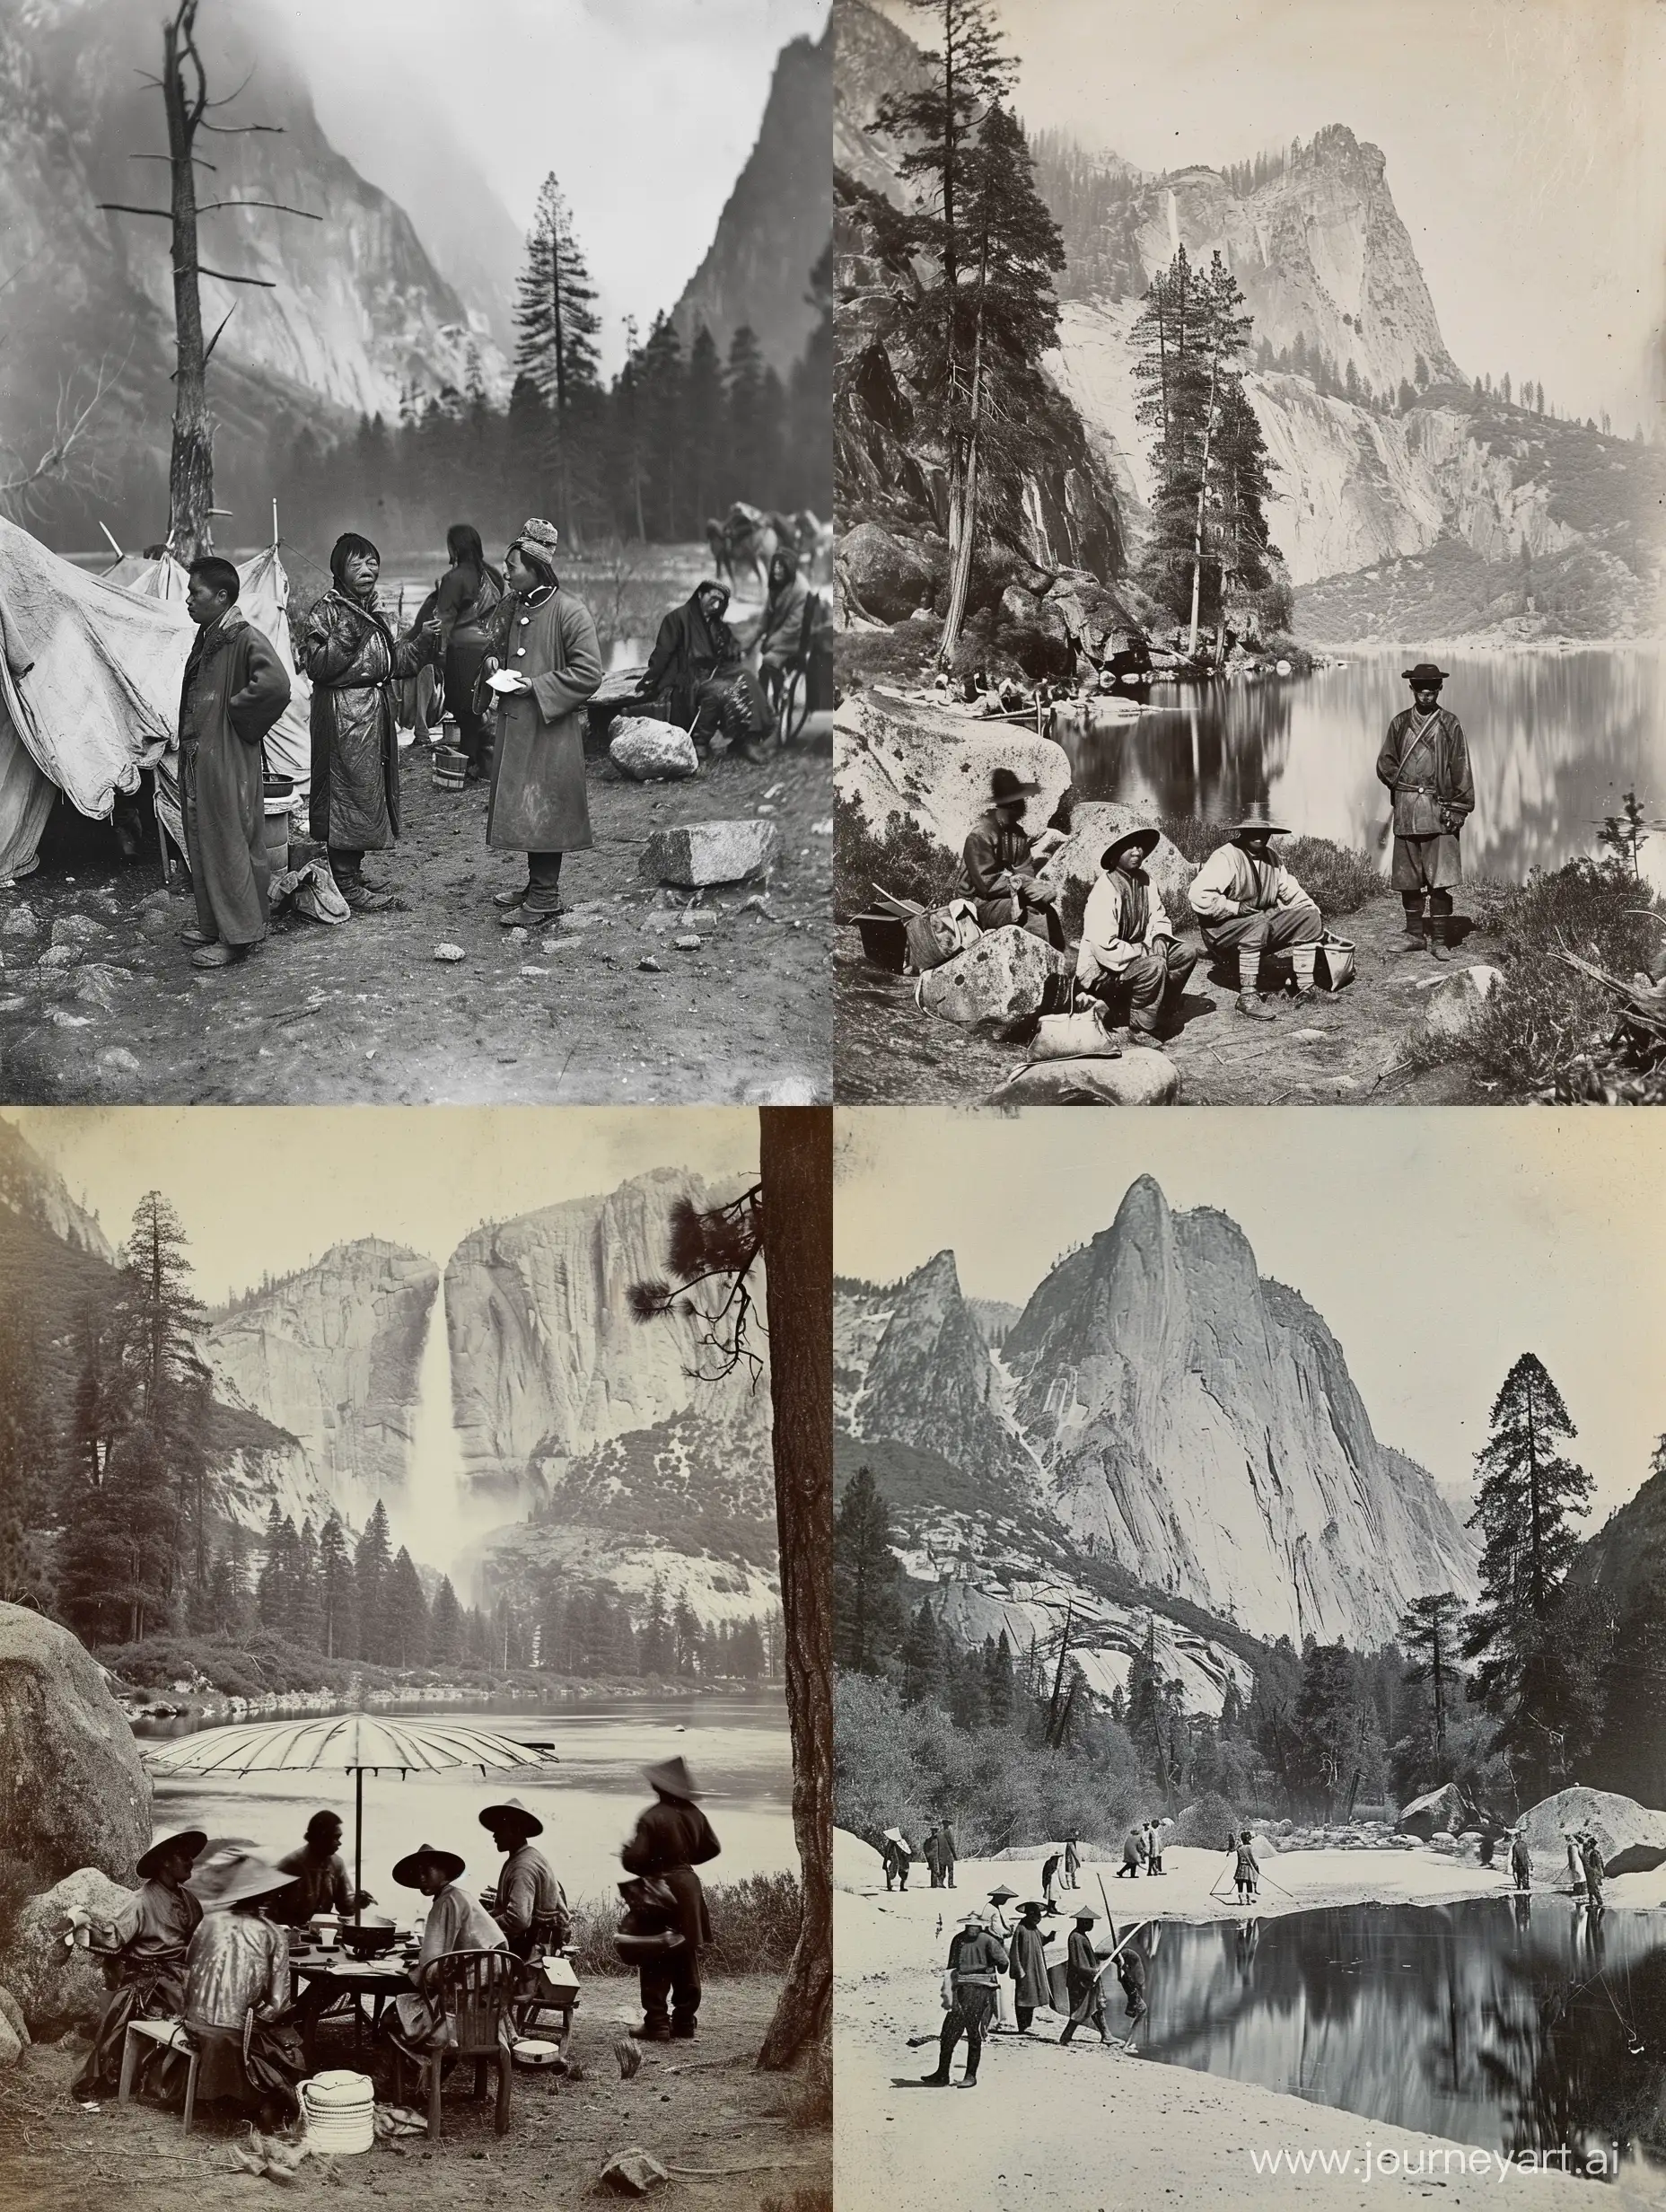 Chinese-People-at-Yosemite-in-Late-1800s-Historical-Black-and-White-Photographs